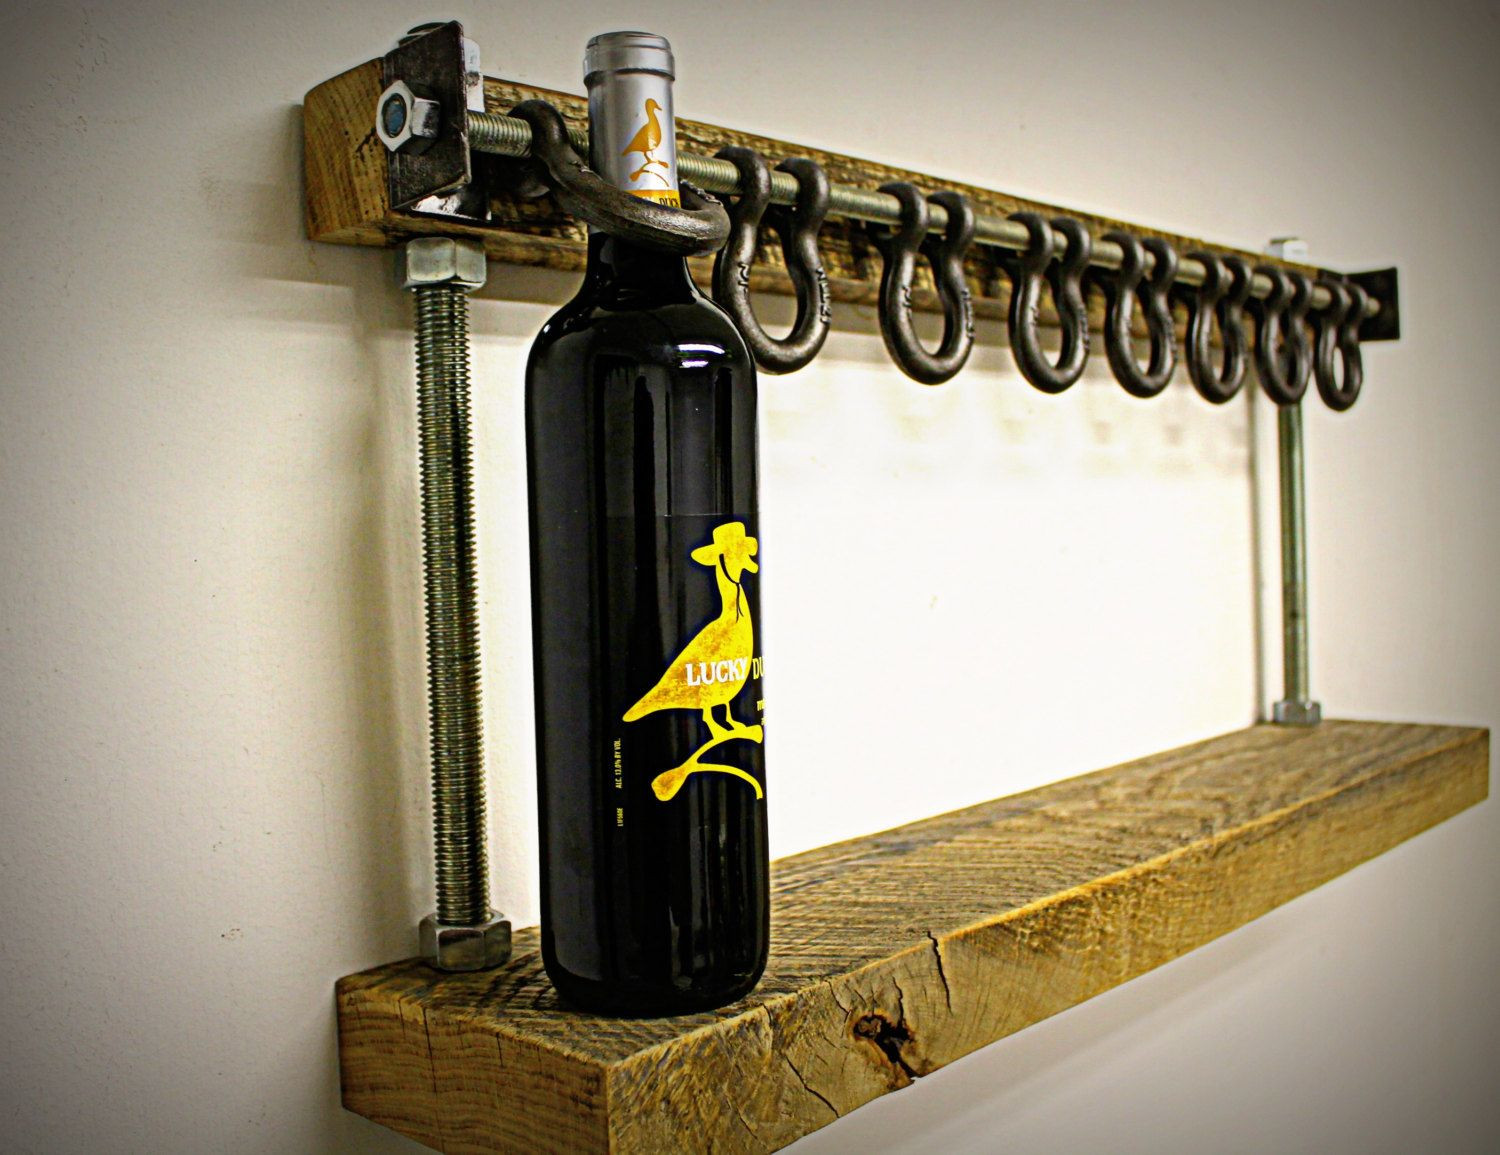 Reclaimed Wood Wine Rack DIY
 The Bella is our 30 wine rack It will hold up to 8